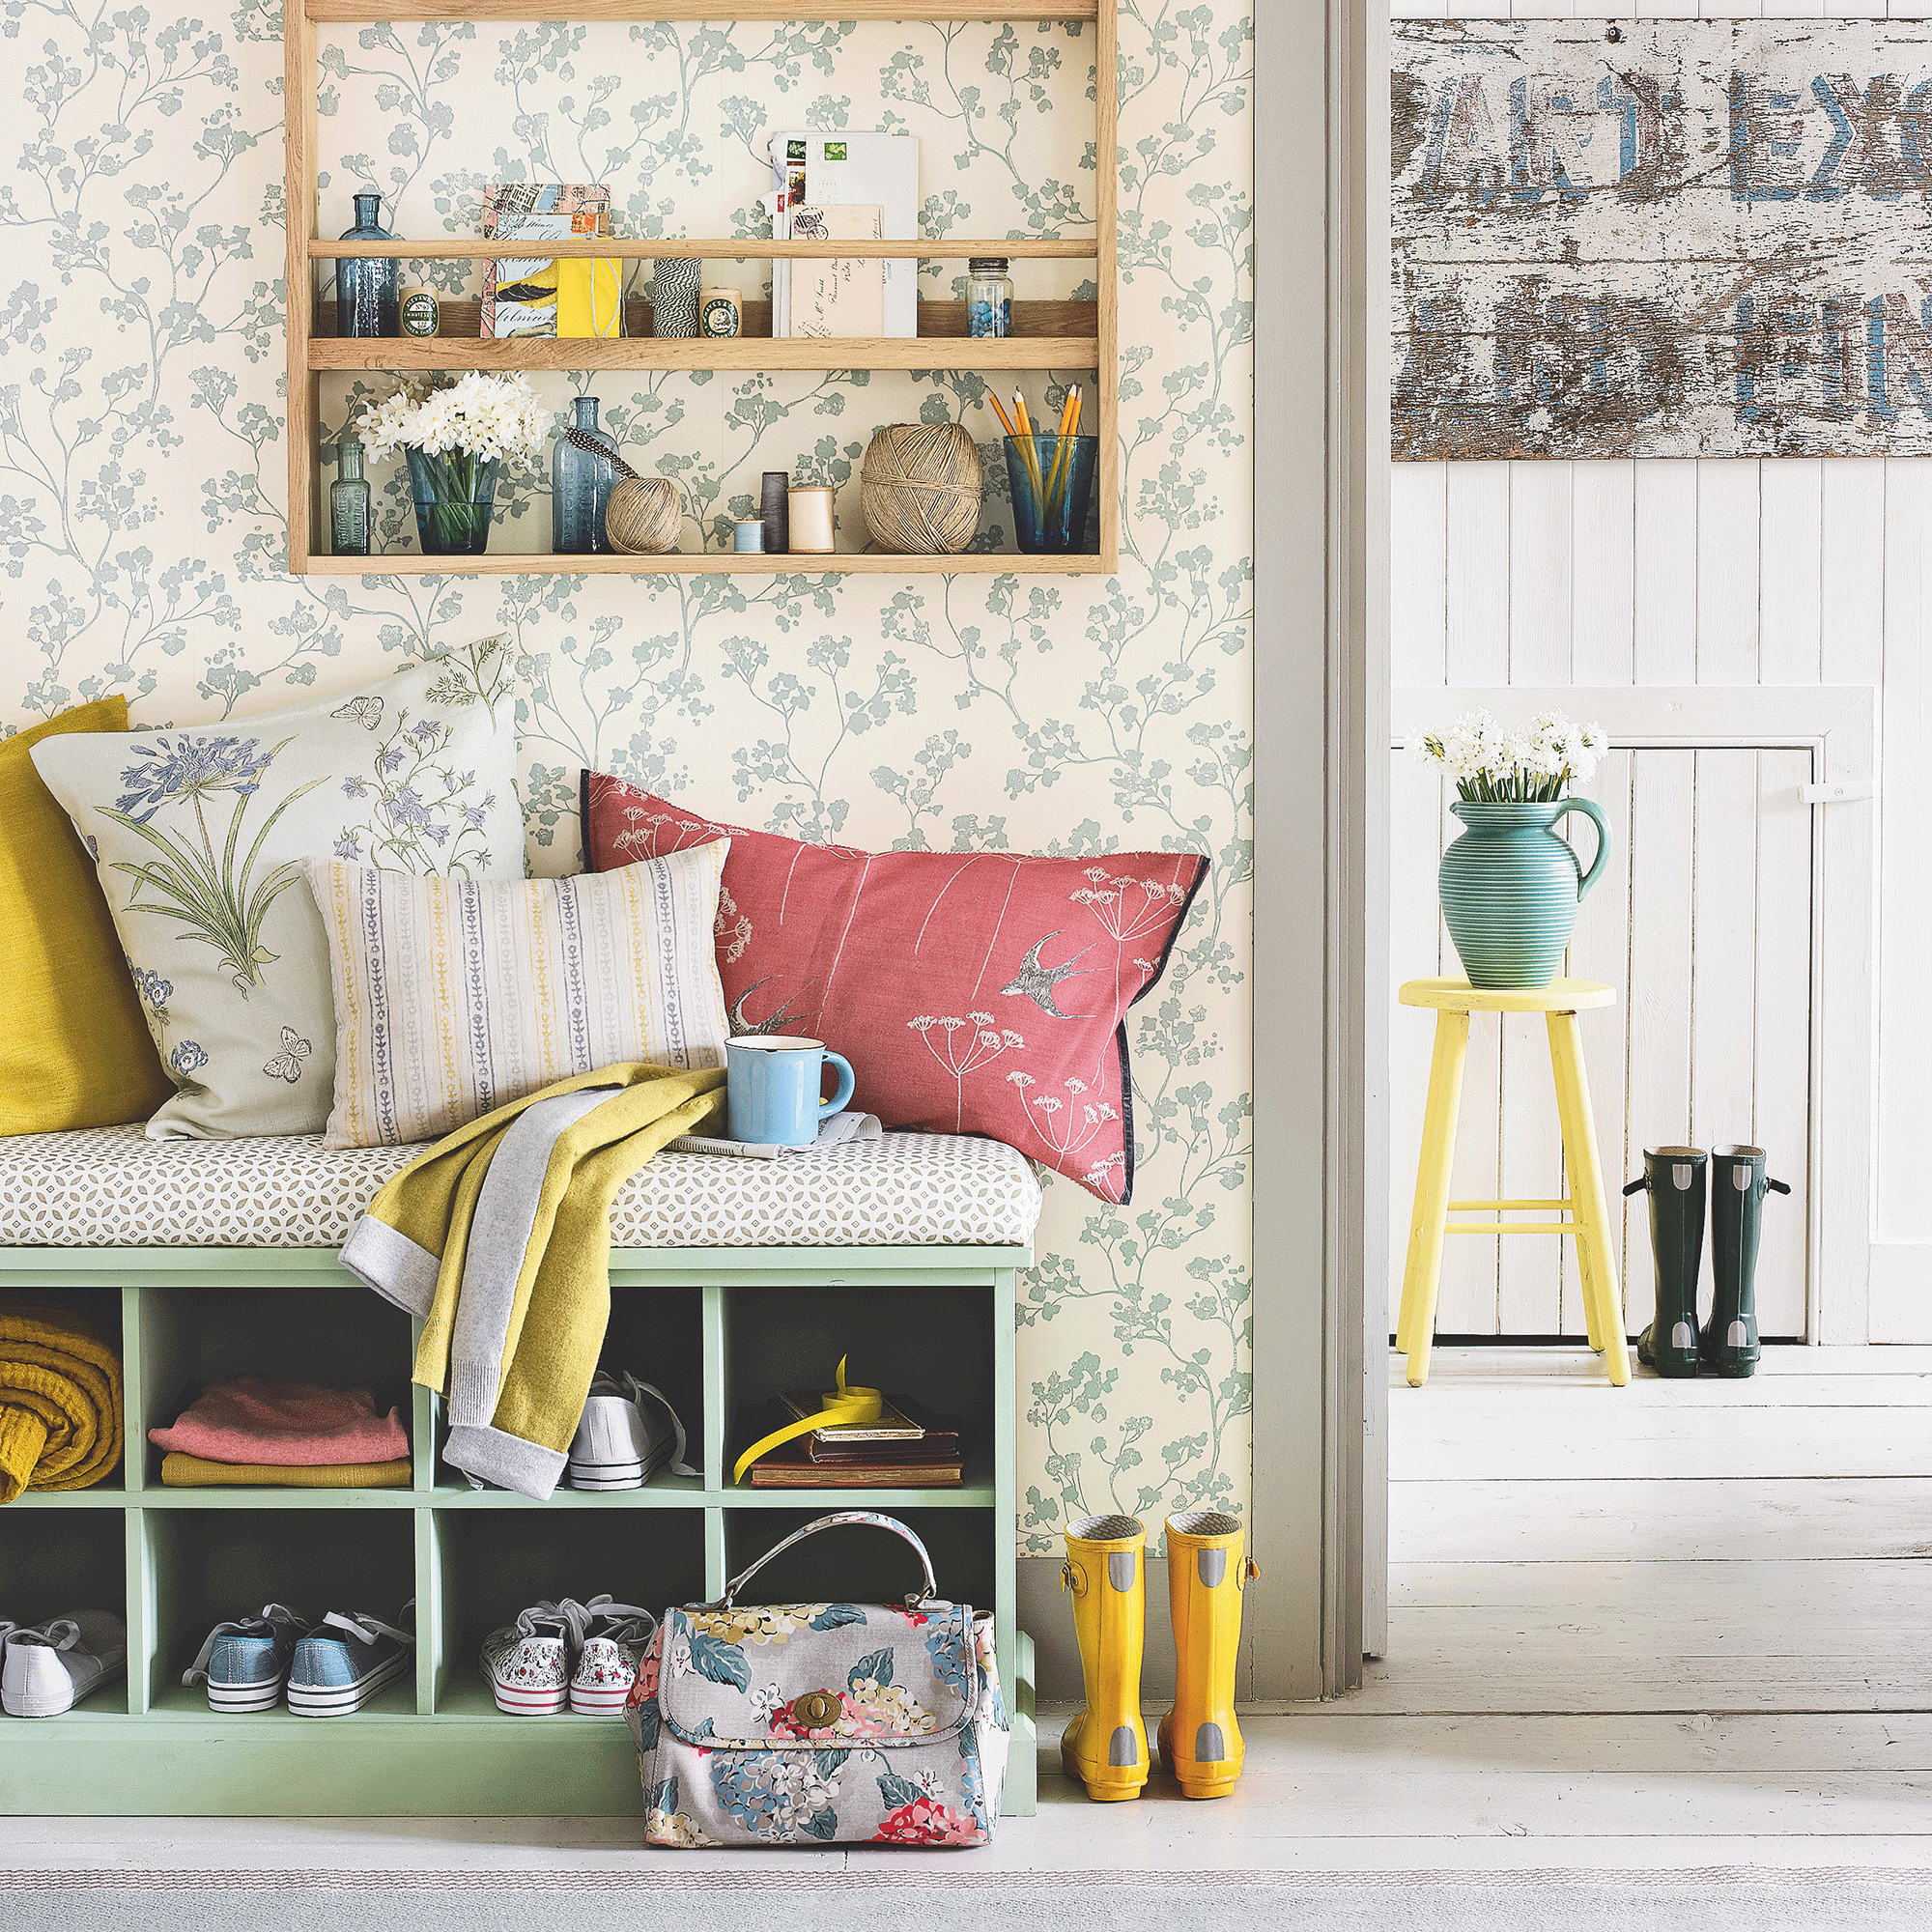 Wallpapered hallway with storage bench